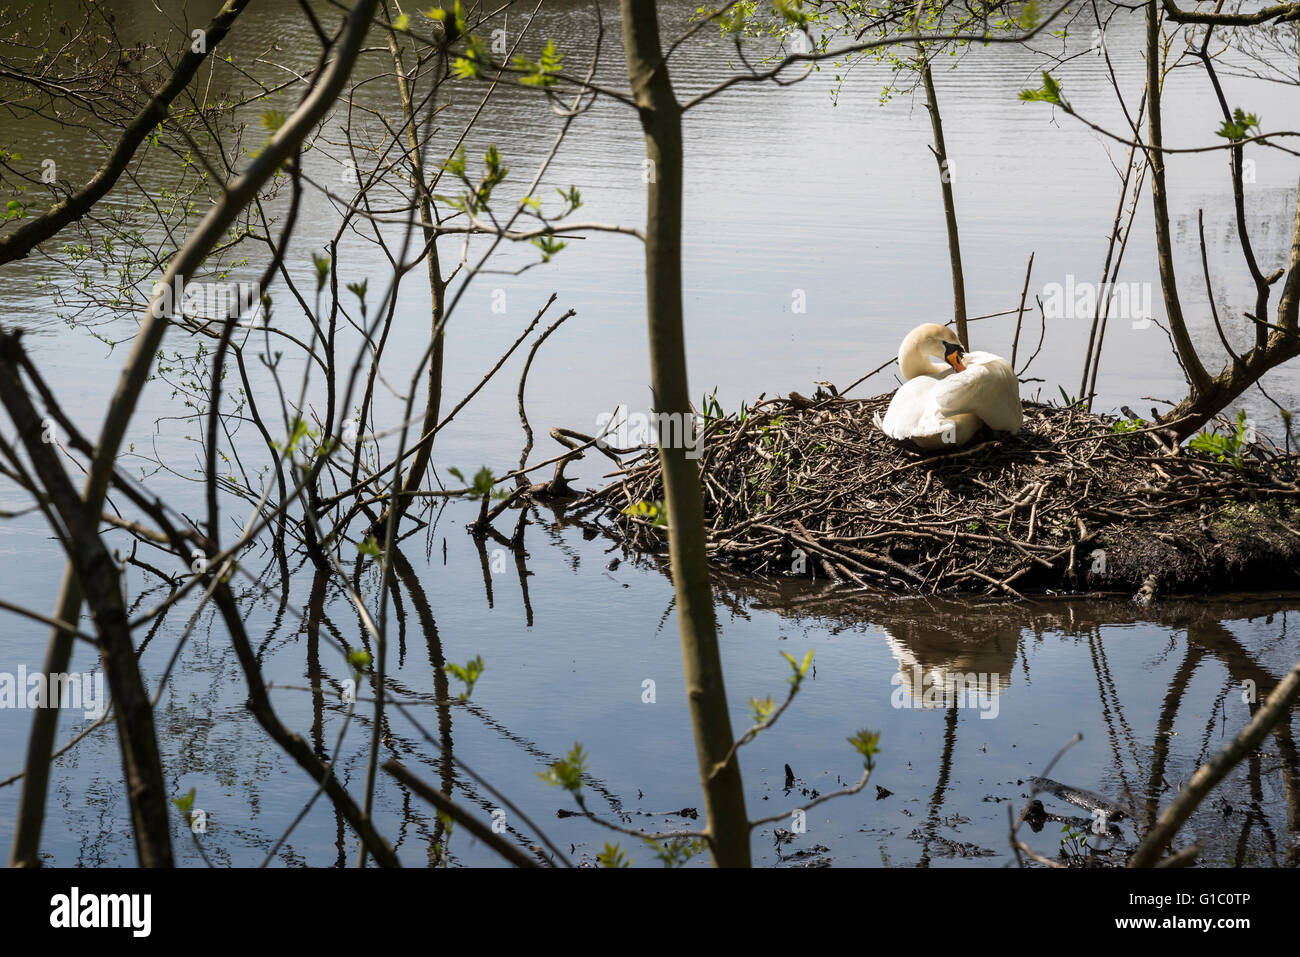 Swan sitting on a nest at the Keg pool in Etherow country park, Stockport, England. Stock Photo